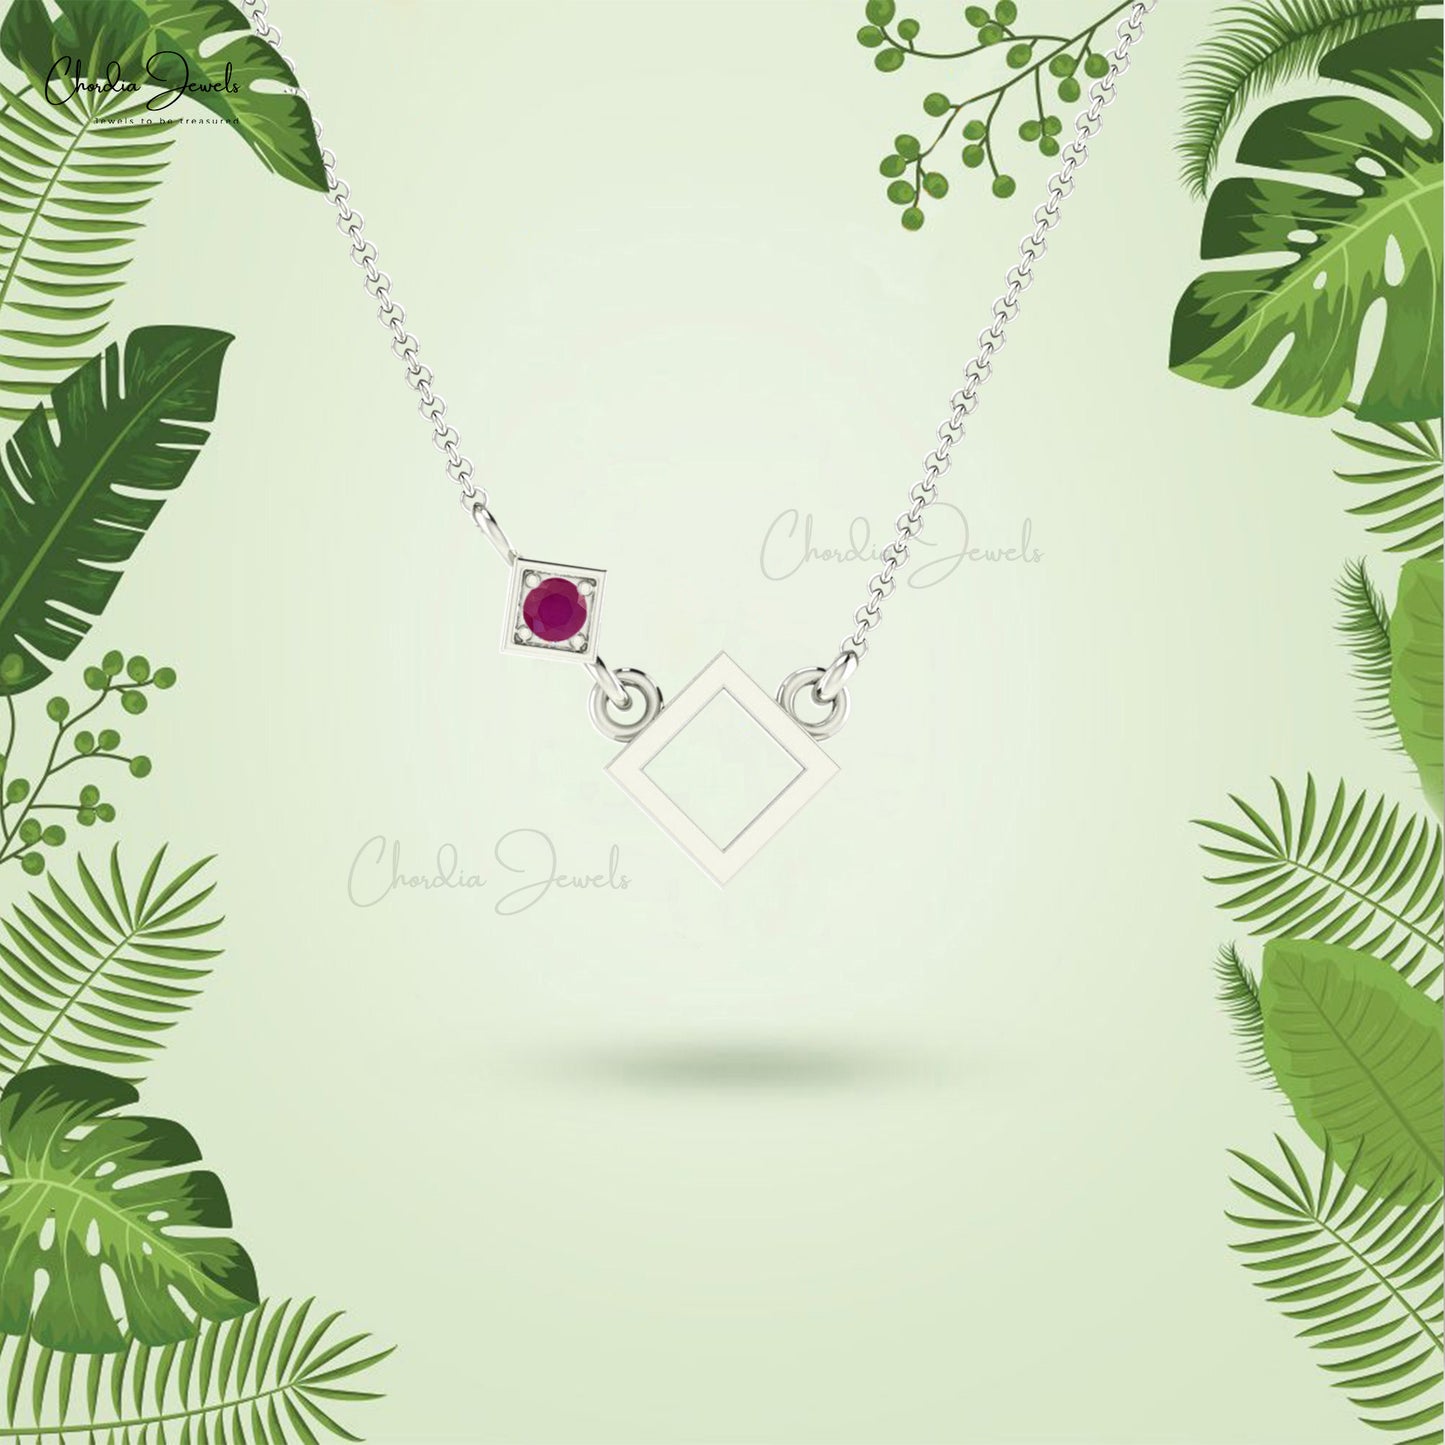 Genuine Red Ruby Necklace